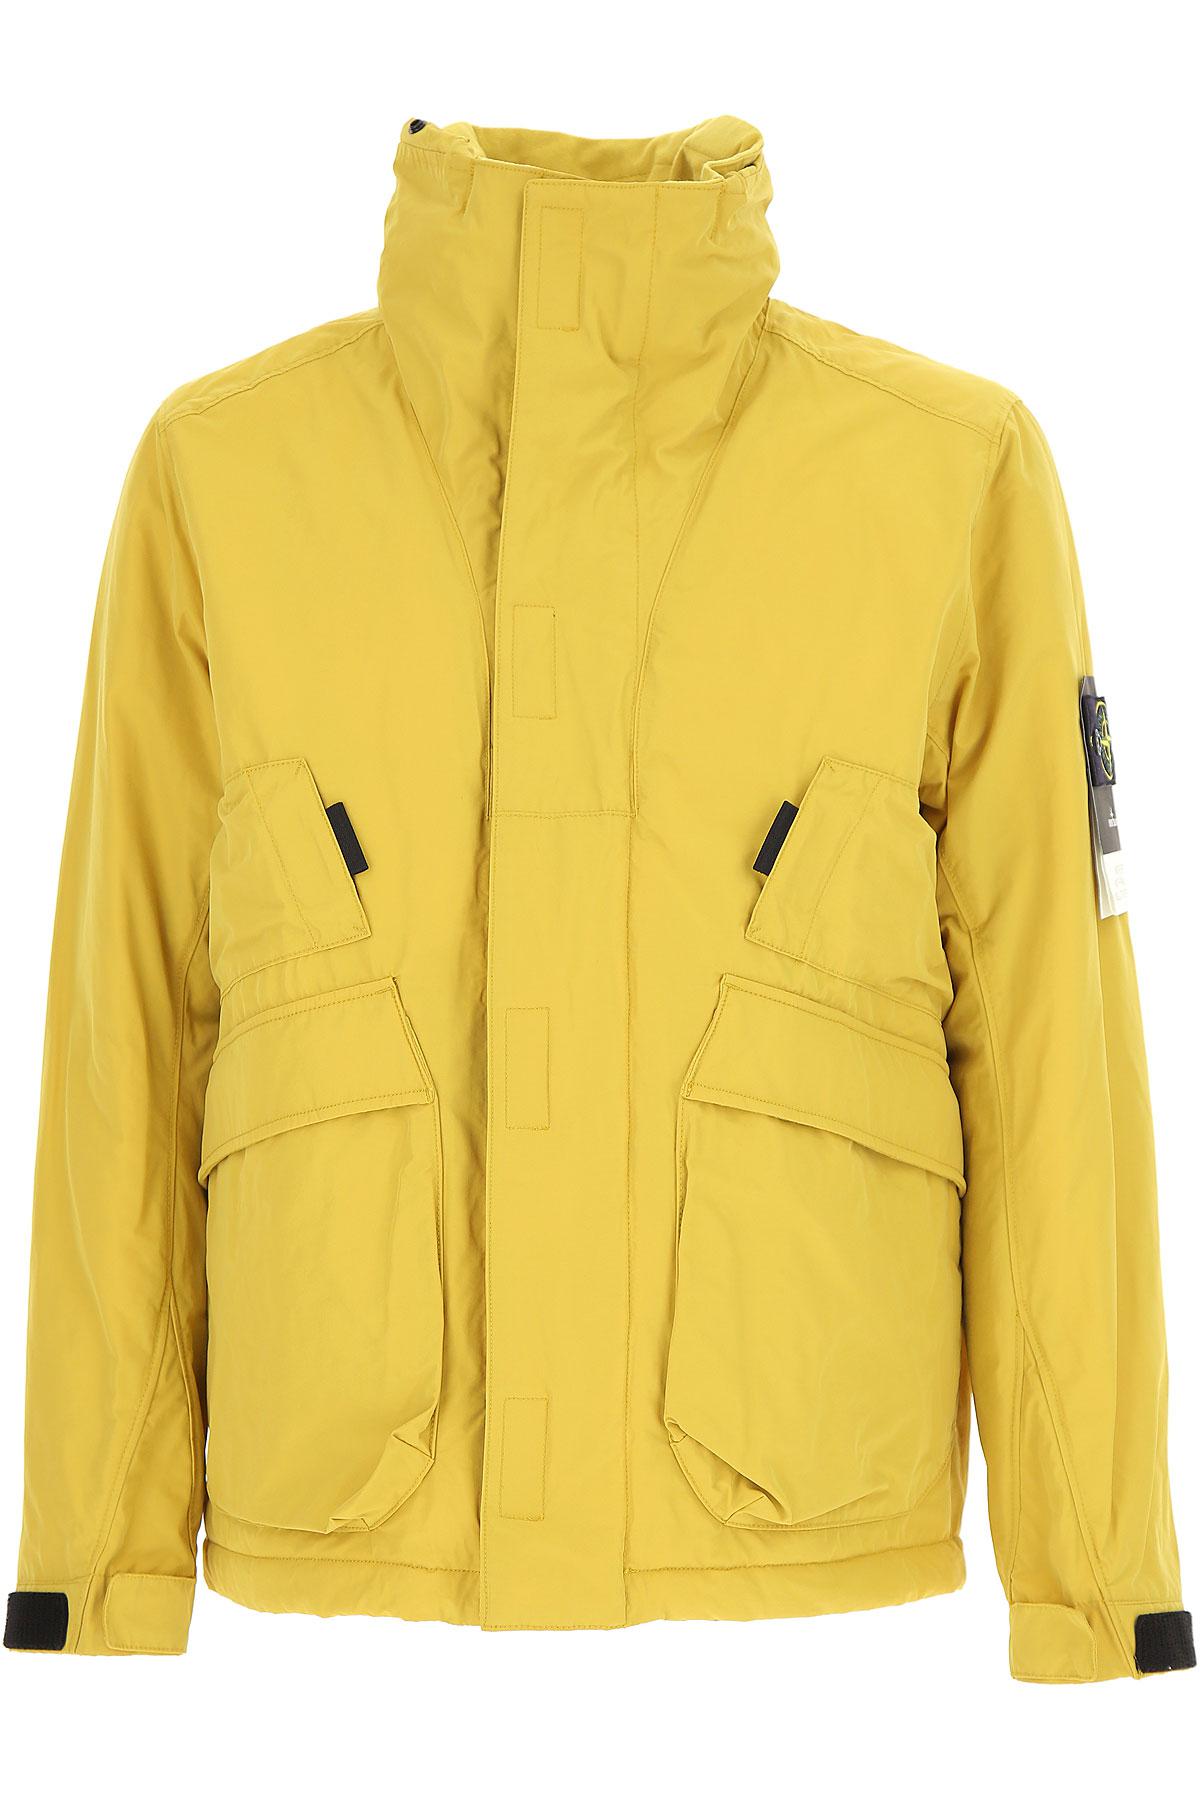 Stone Island Clothing For Men in Yellow for Men - Lyst